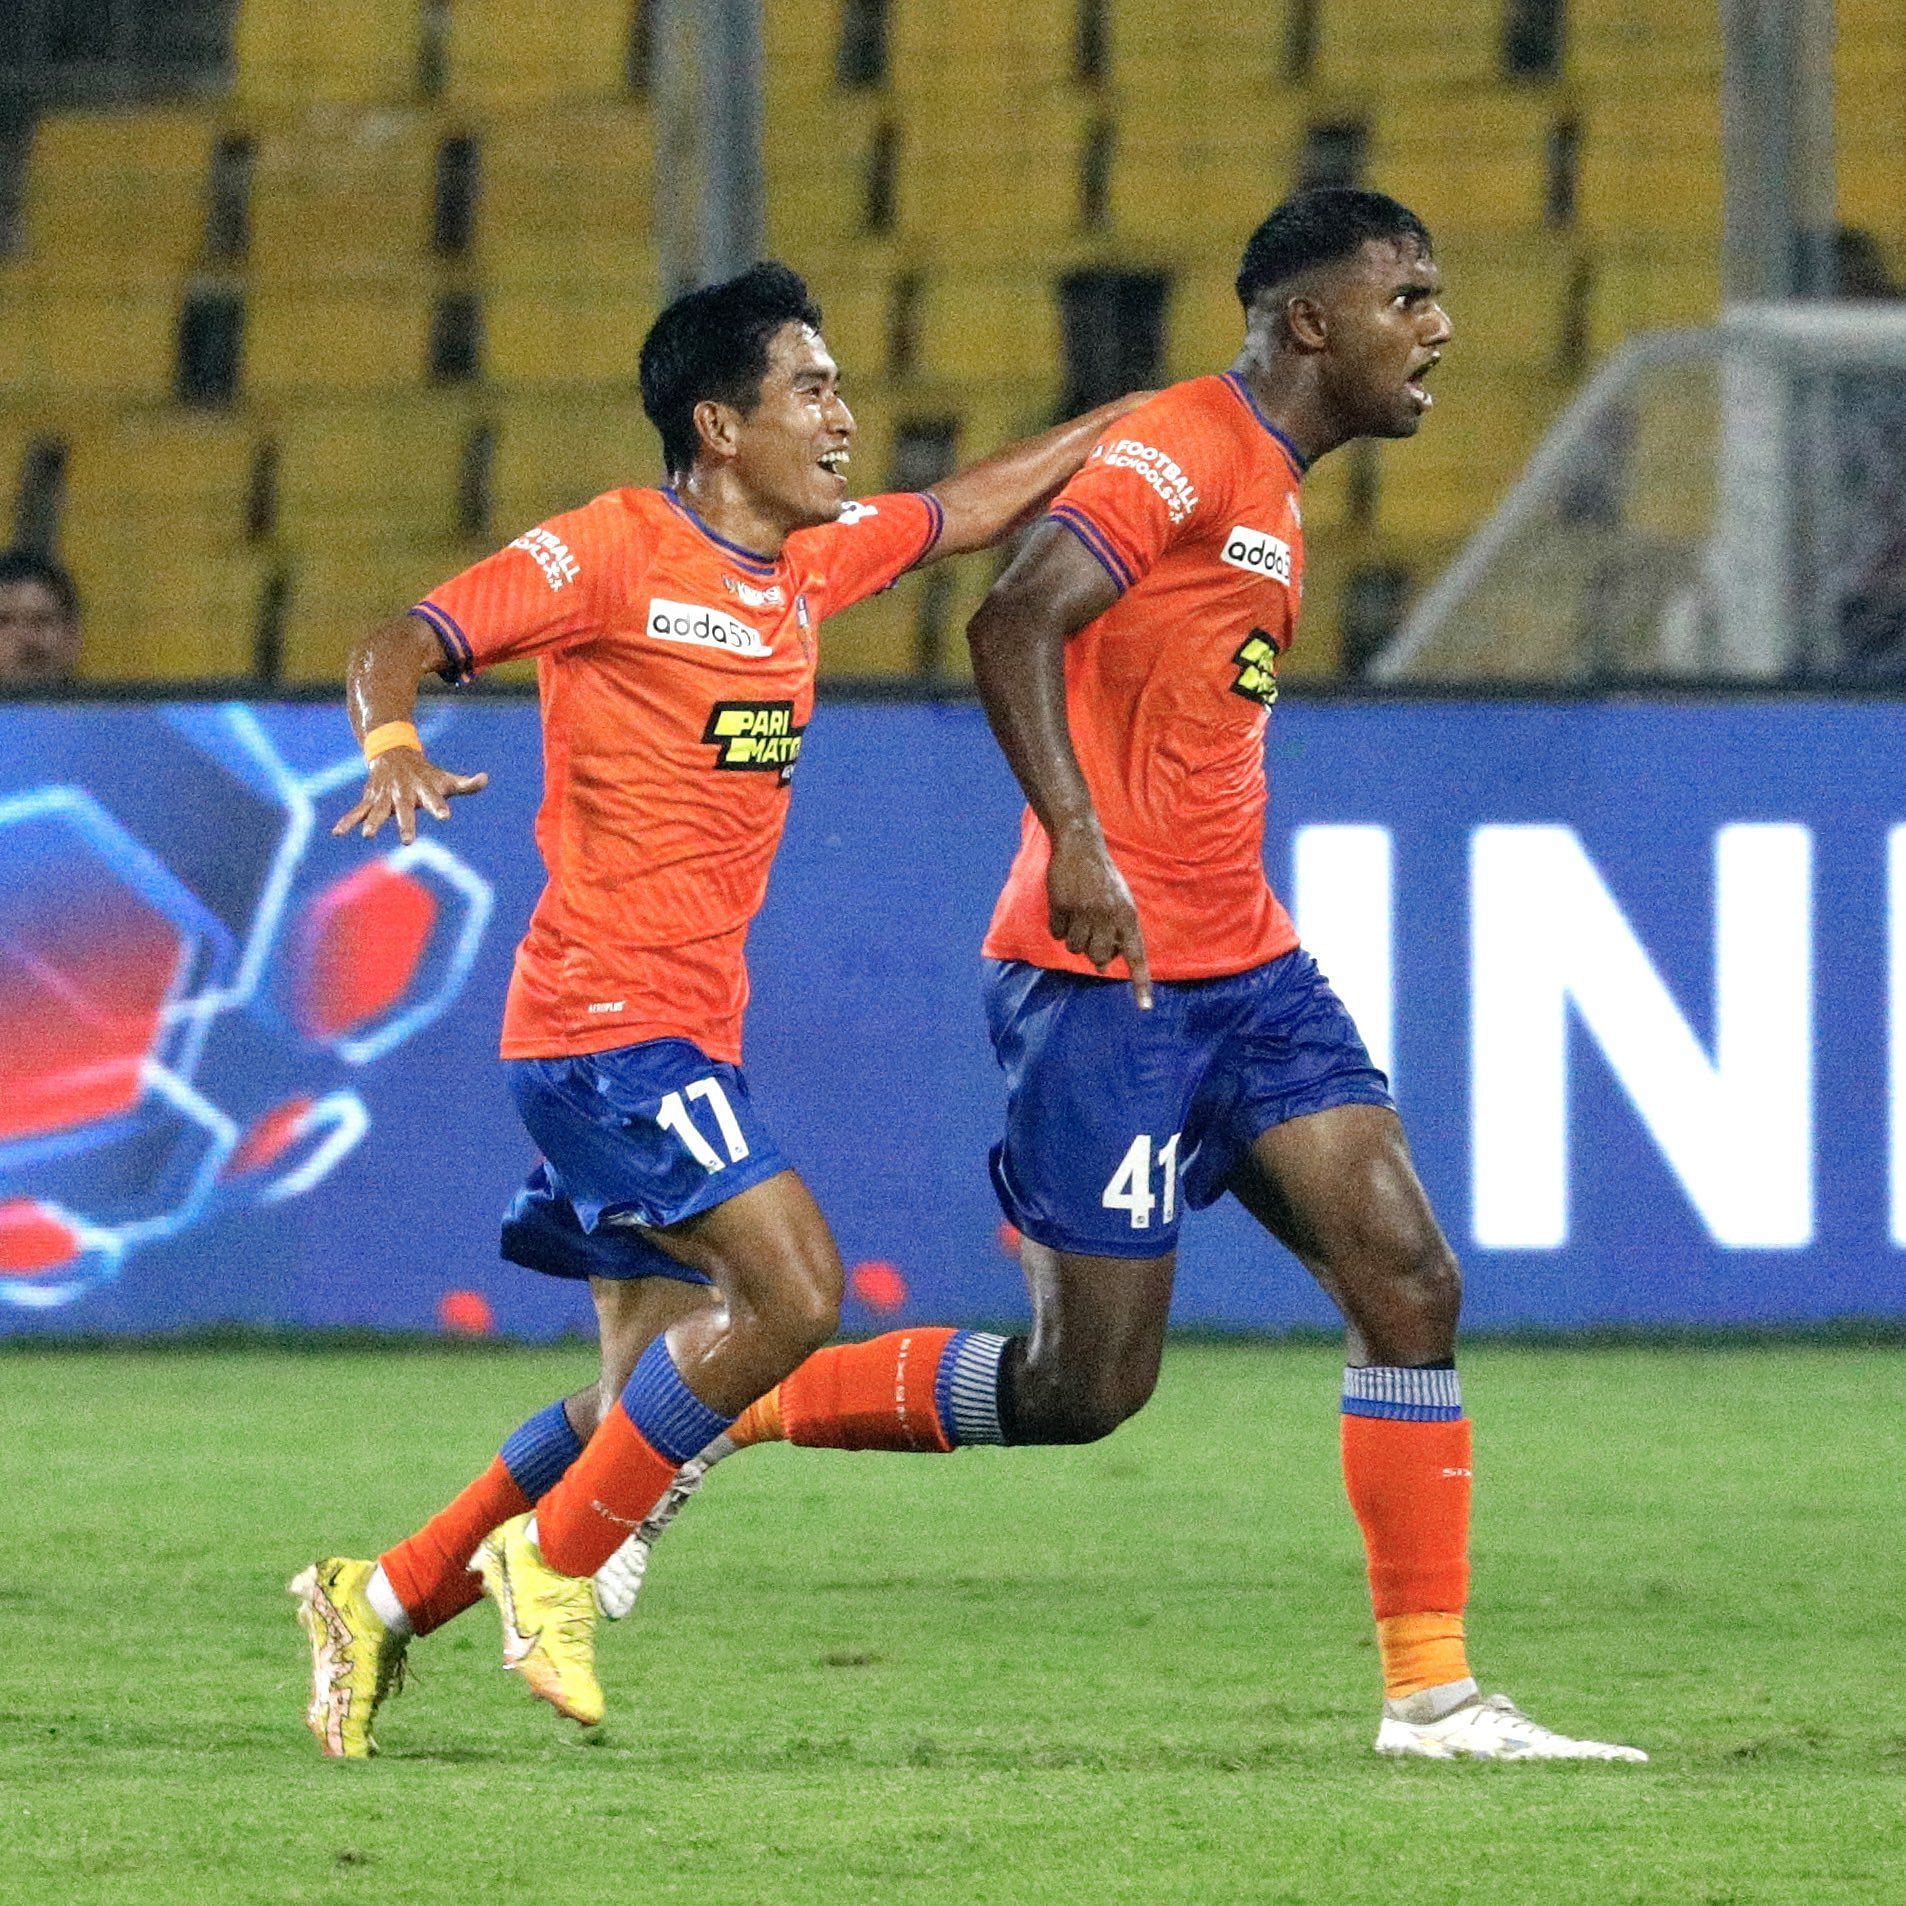 Jay Gupta celebrates after scoring his first ISL goal against Odisha earlier this year.